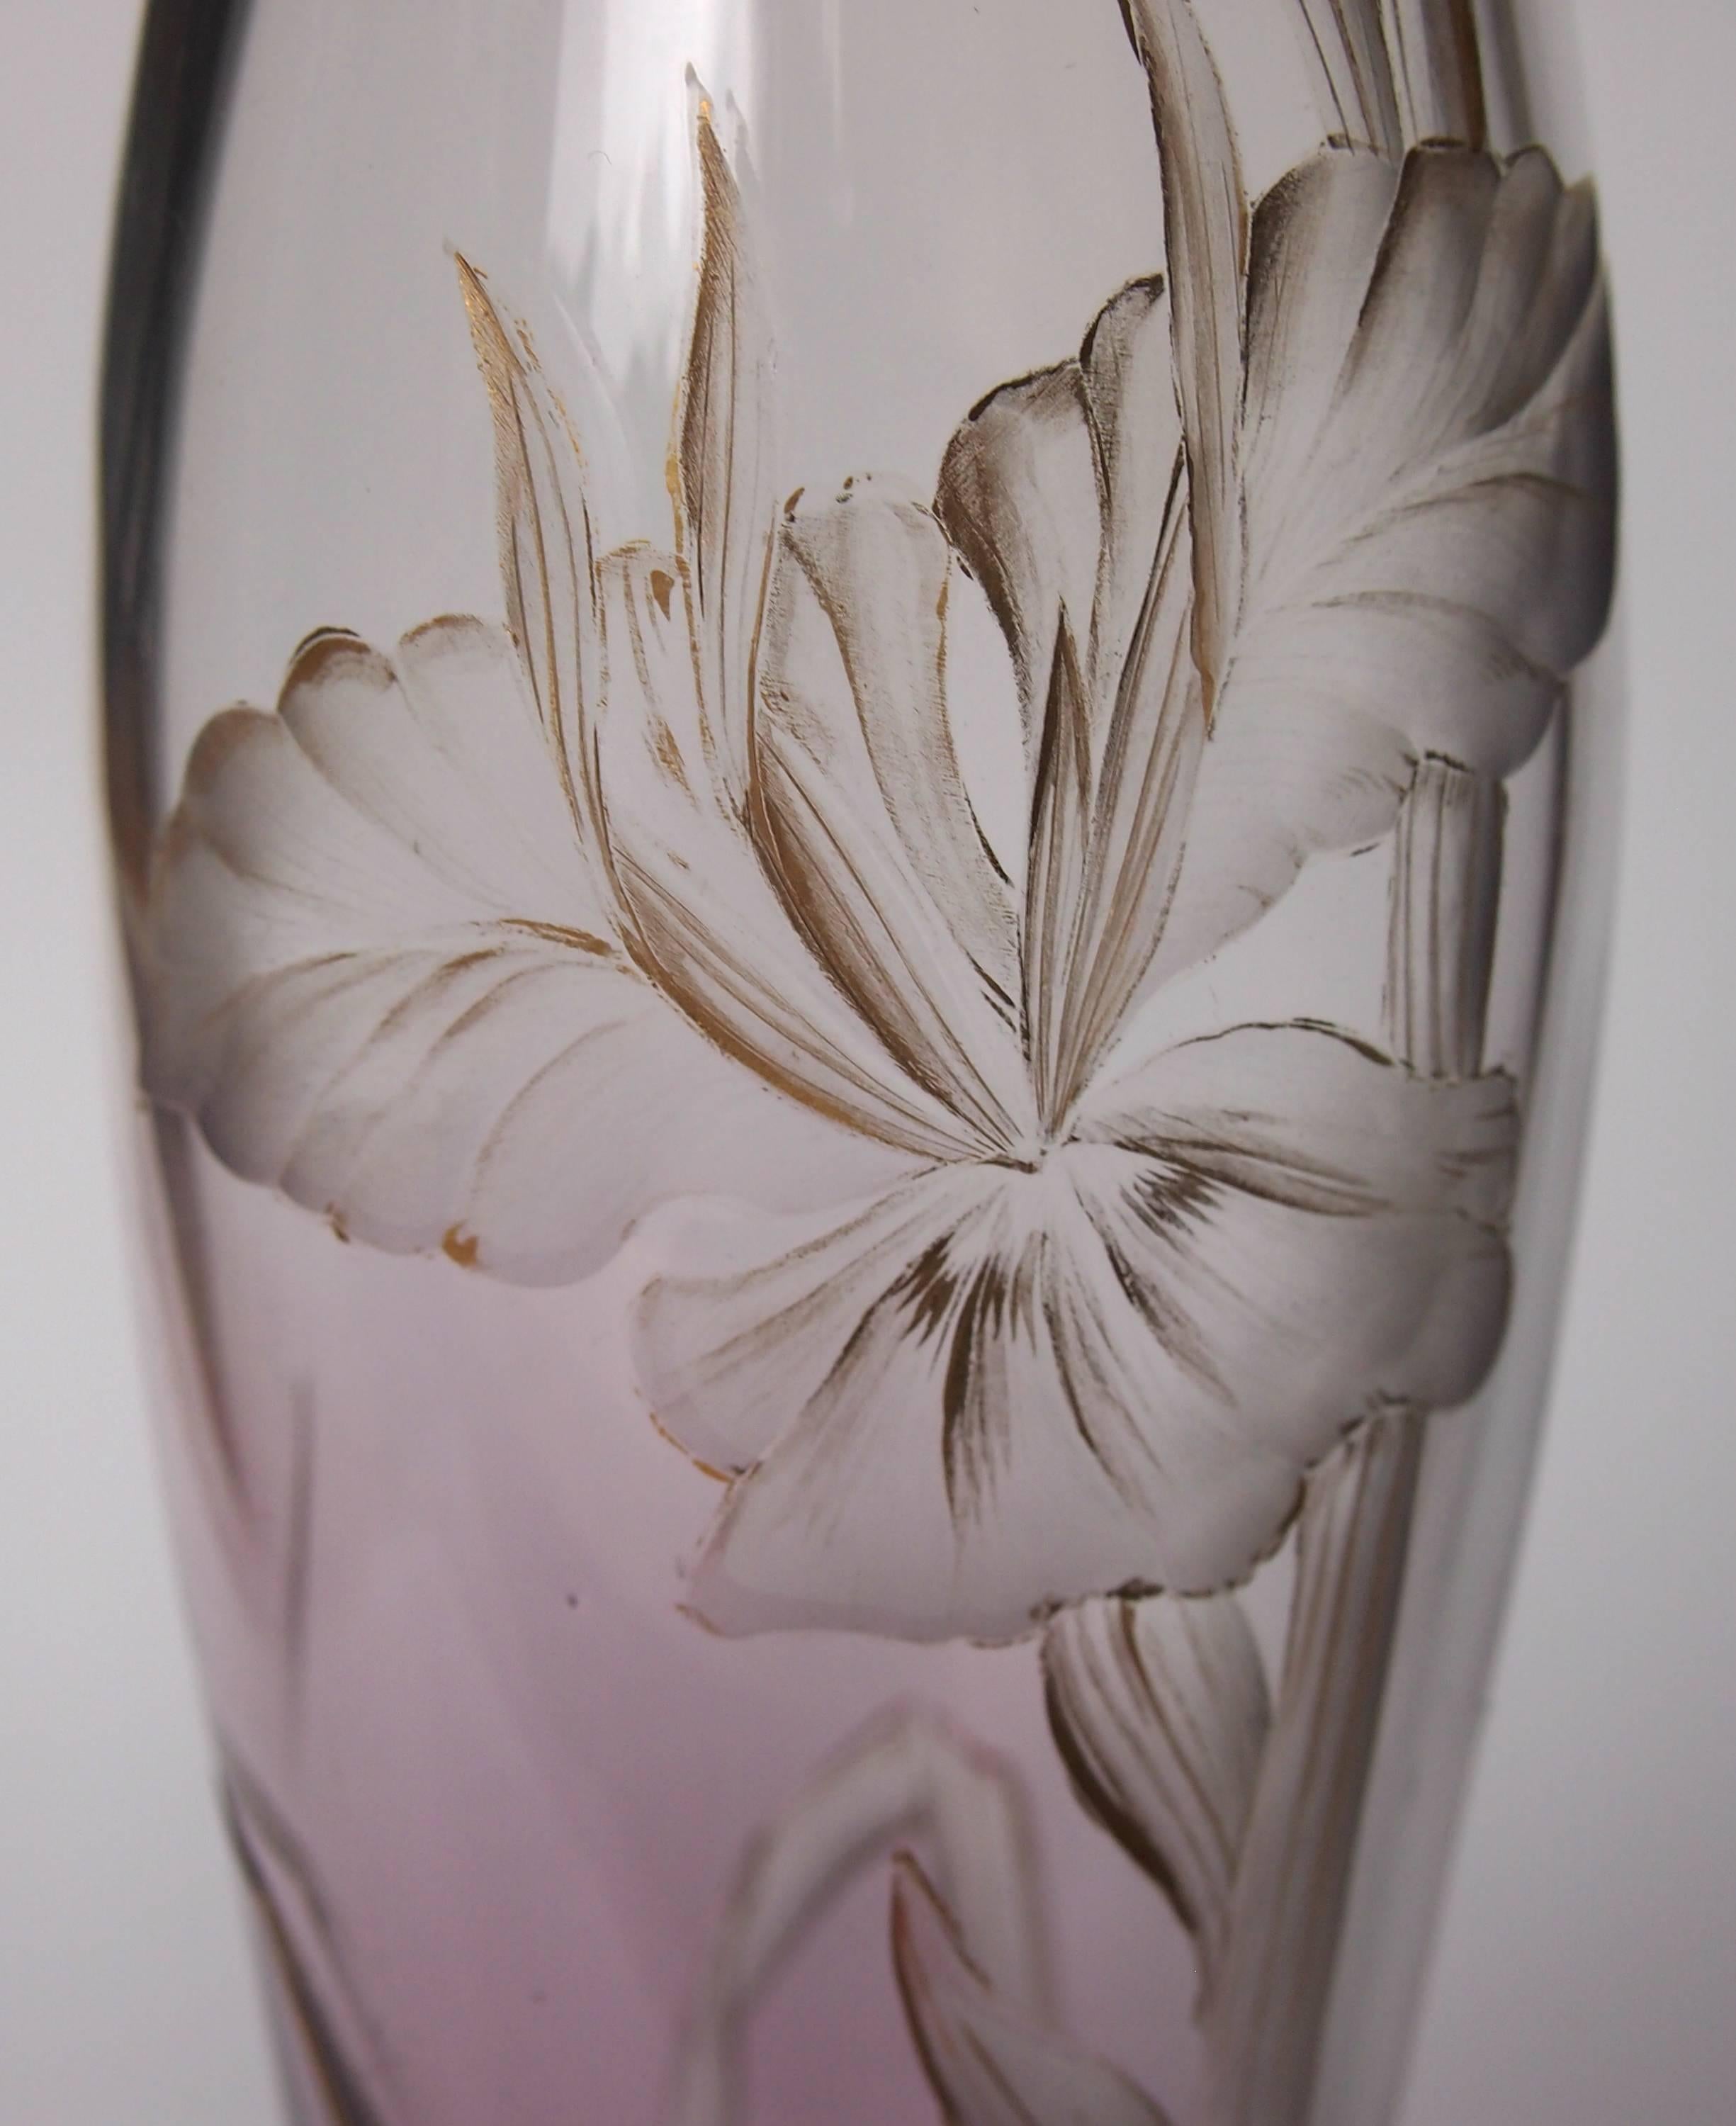 A very striking Art Nouveau Harrach vase clear going down to purple, finely intaglio cut with lilies. The vase is gilded and decorated to the base with a Vienna Secession like star pattern. Only in the most superior Harrach intaglio cut pieces was